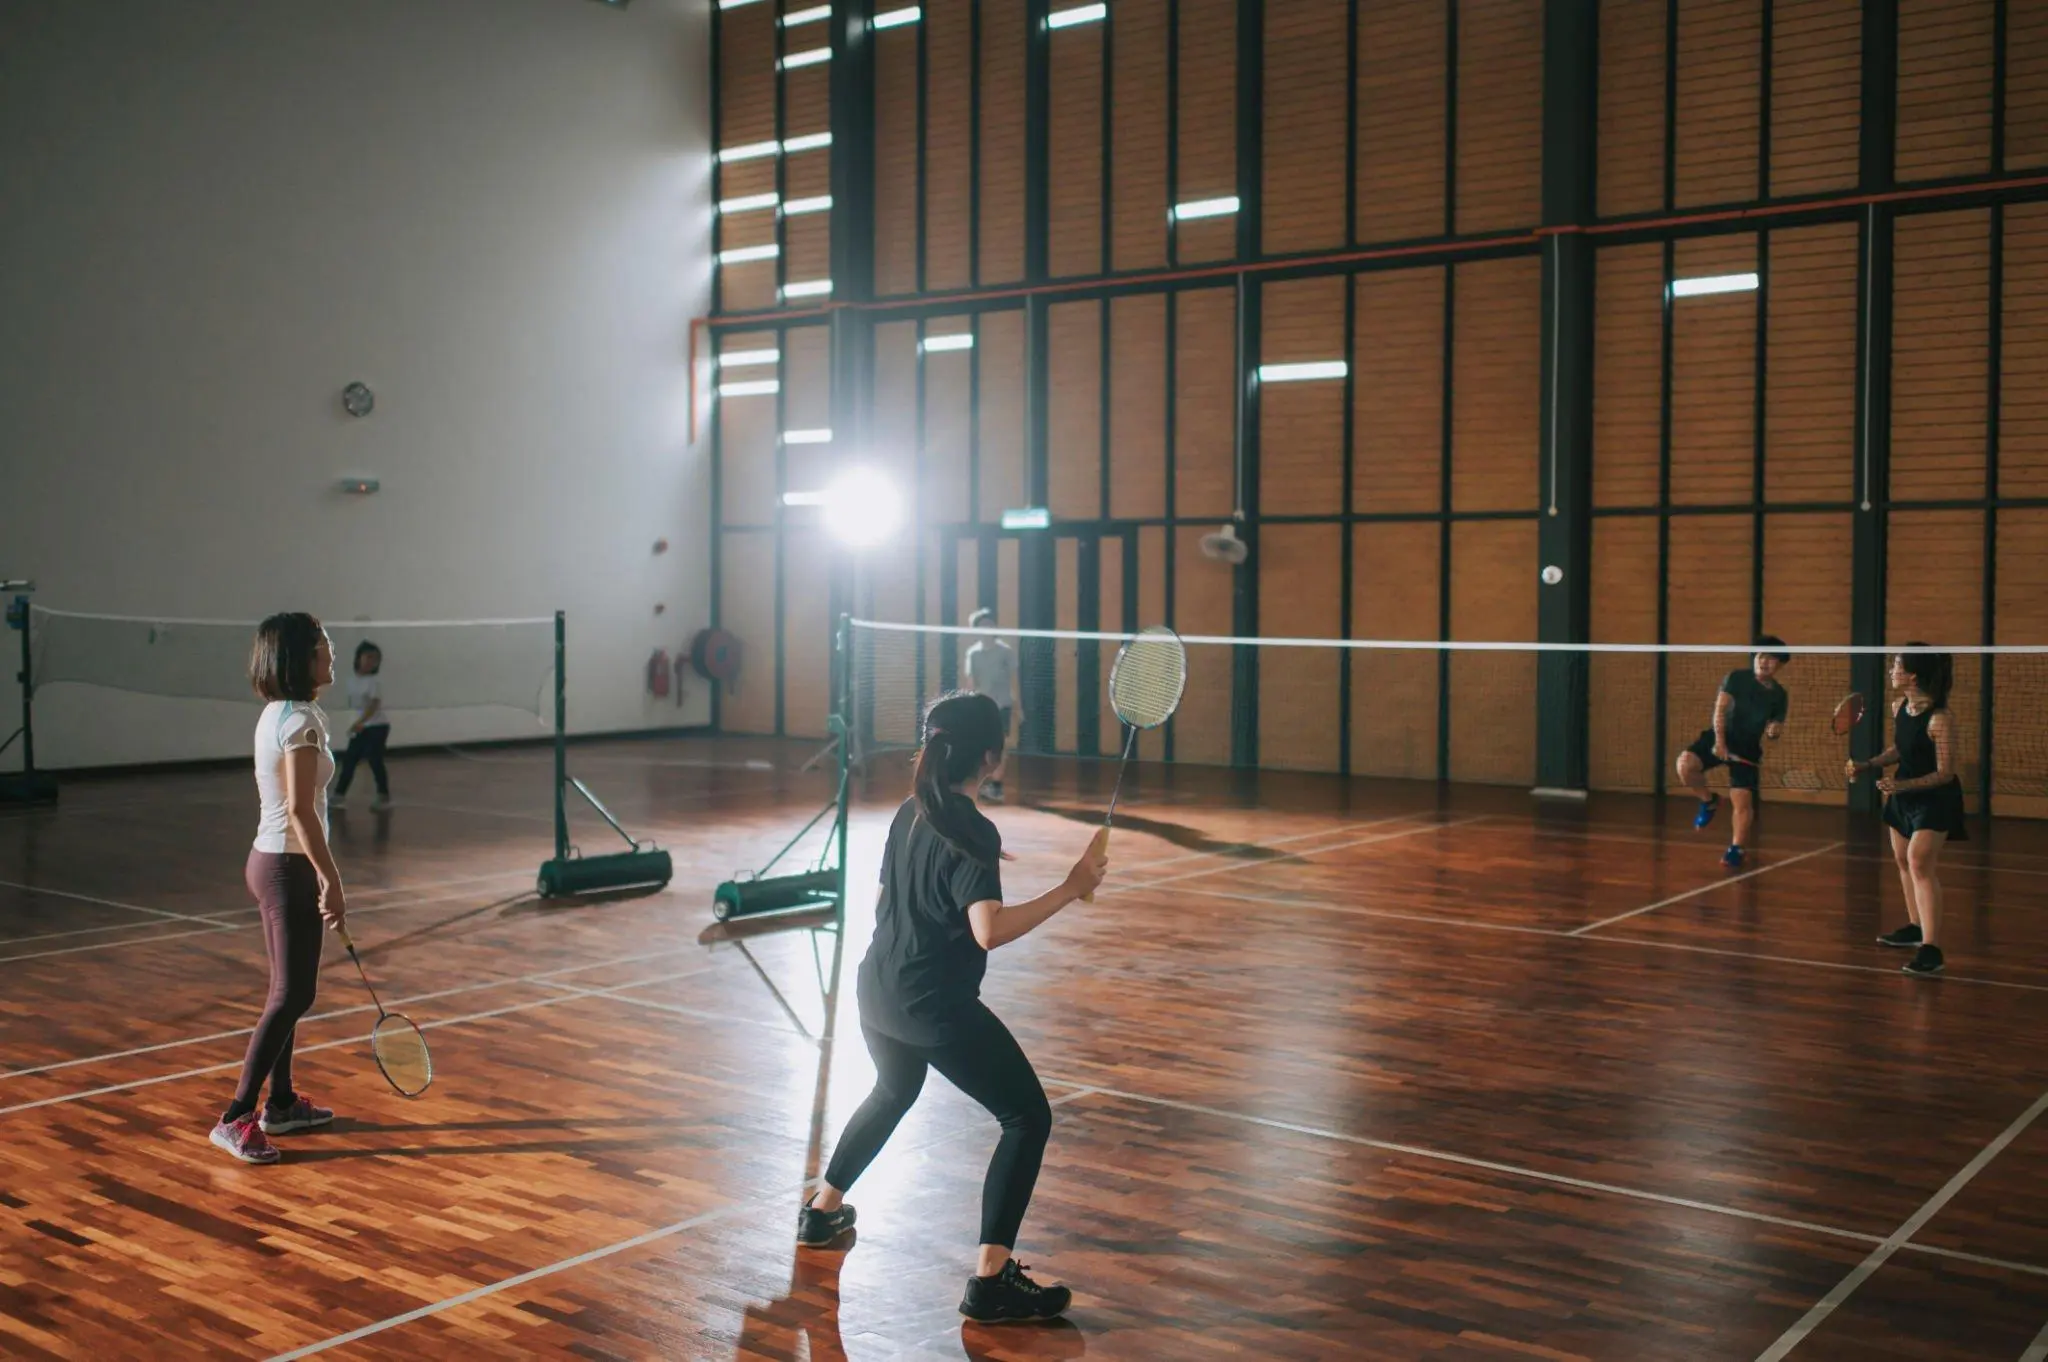 dubai badminton court. Learn everything you need to know about playing badminton court in Dubai, including court types, rules, and equipment requirements.